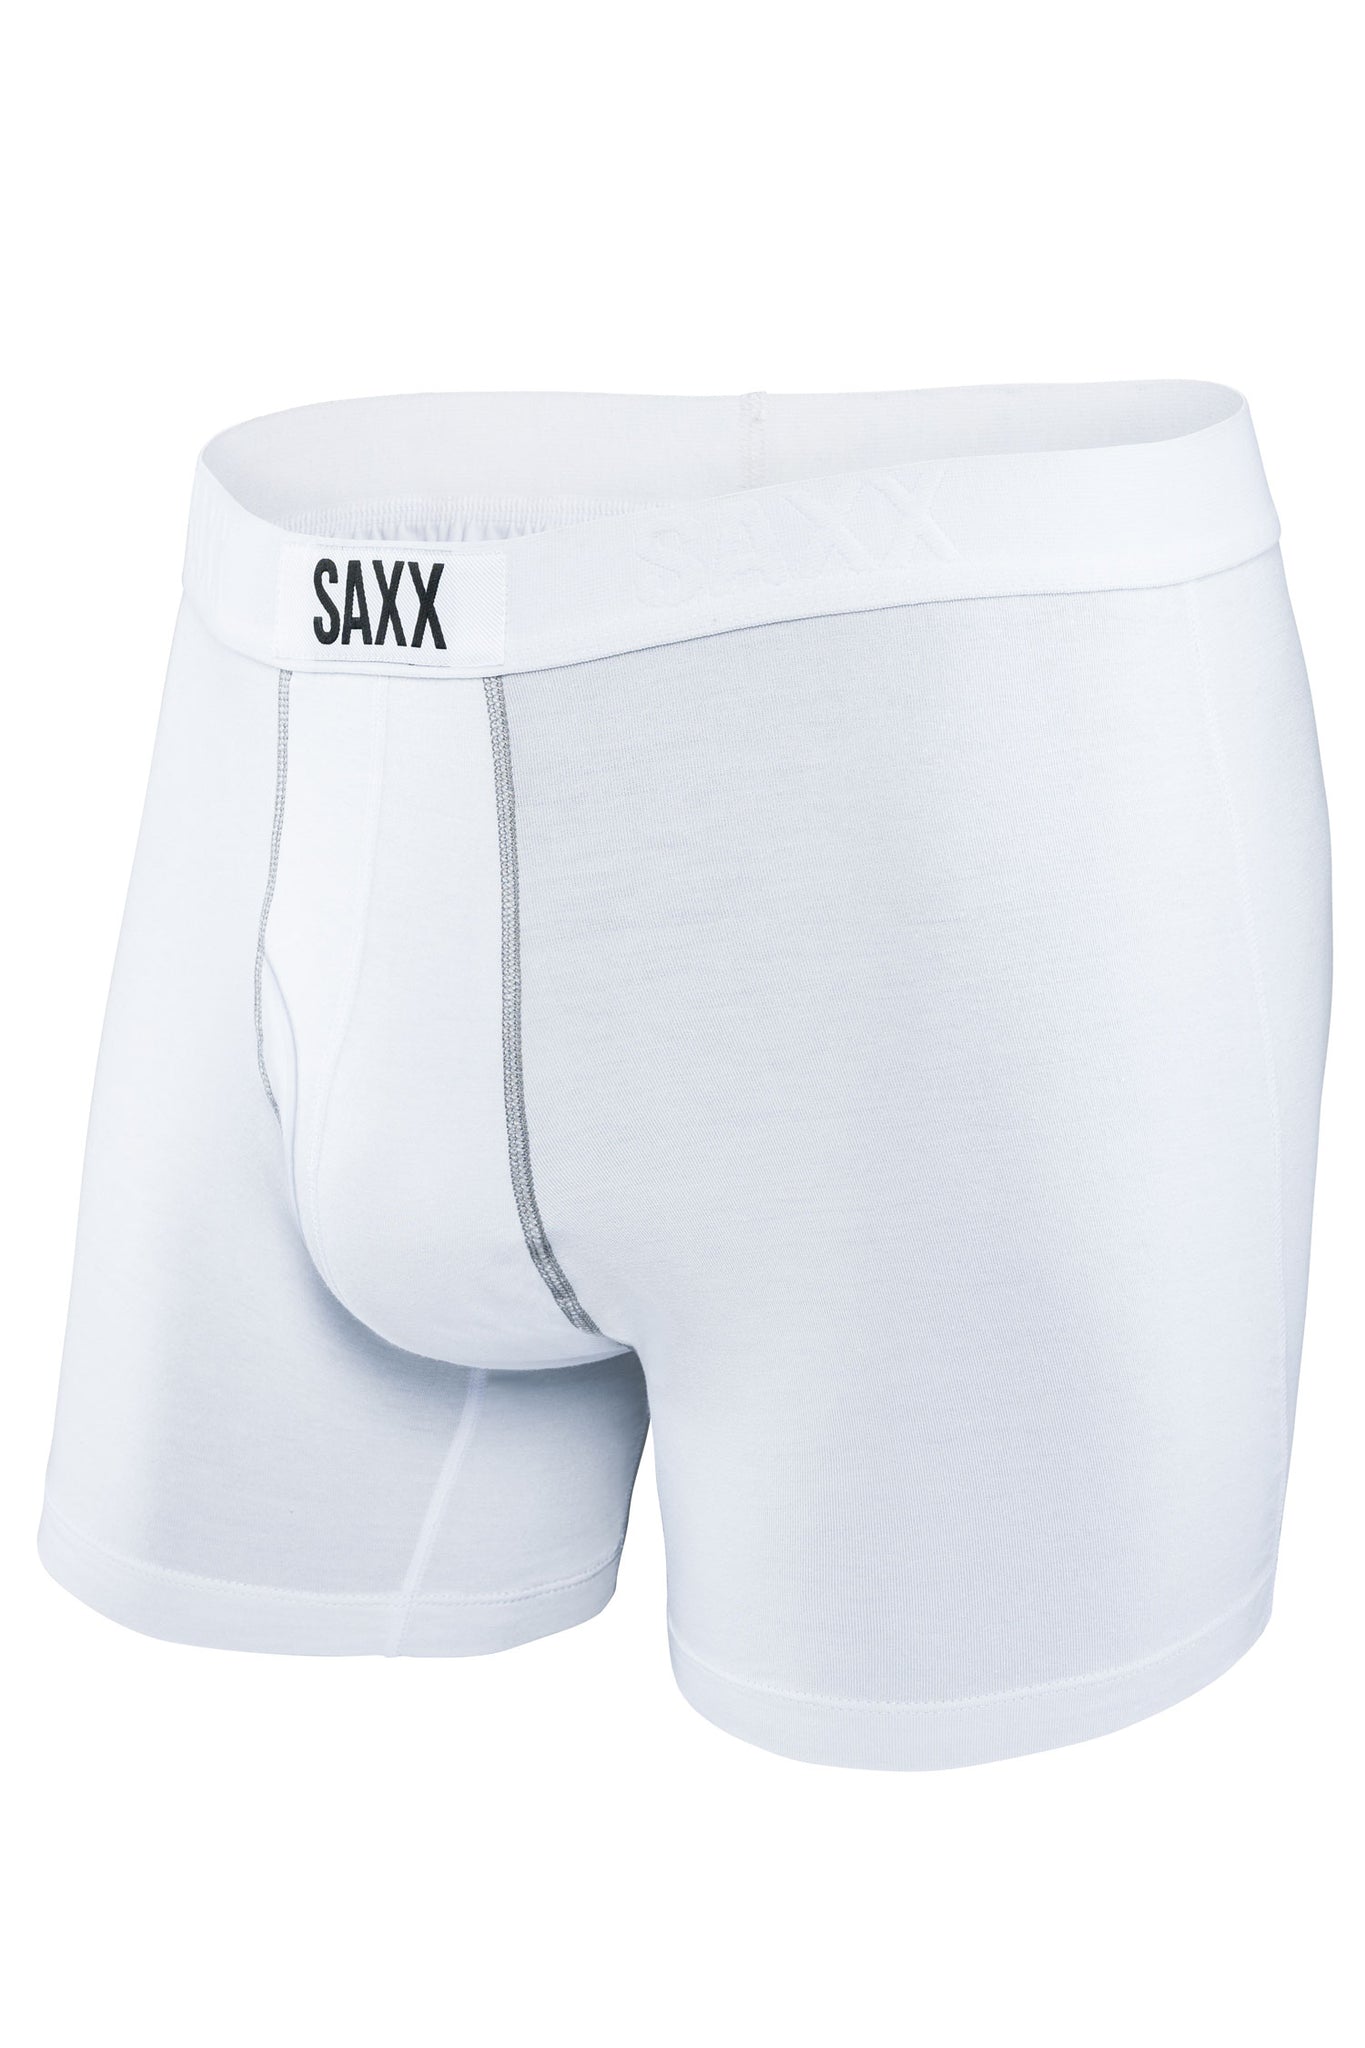 Ultra Boxer Brief - Relaxed Fit - White